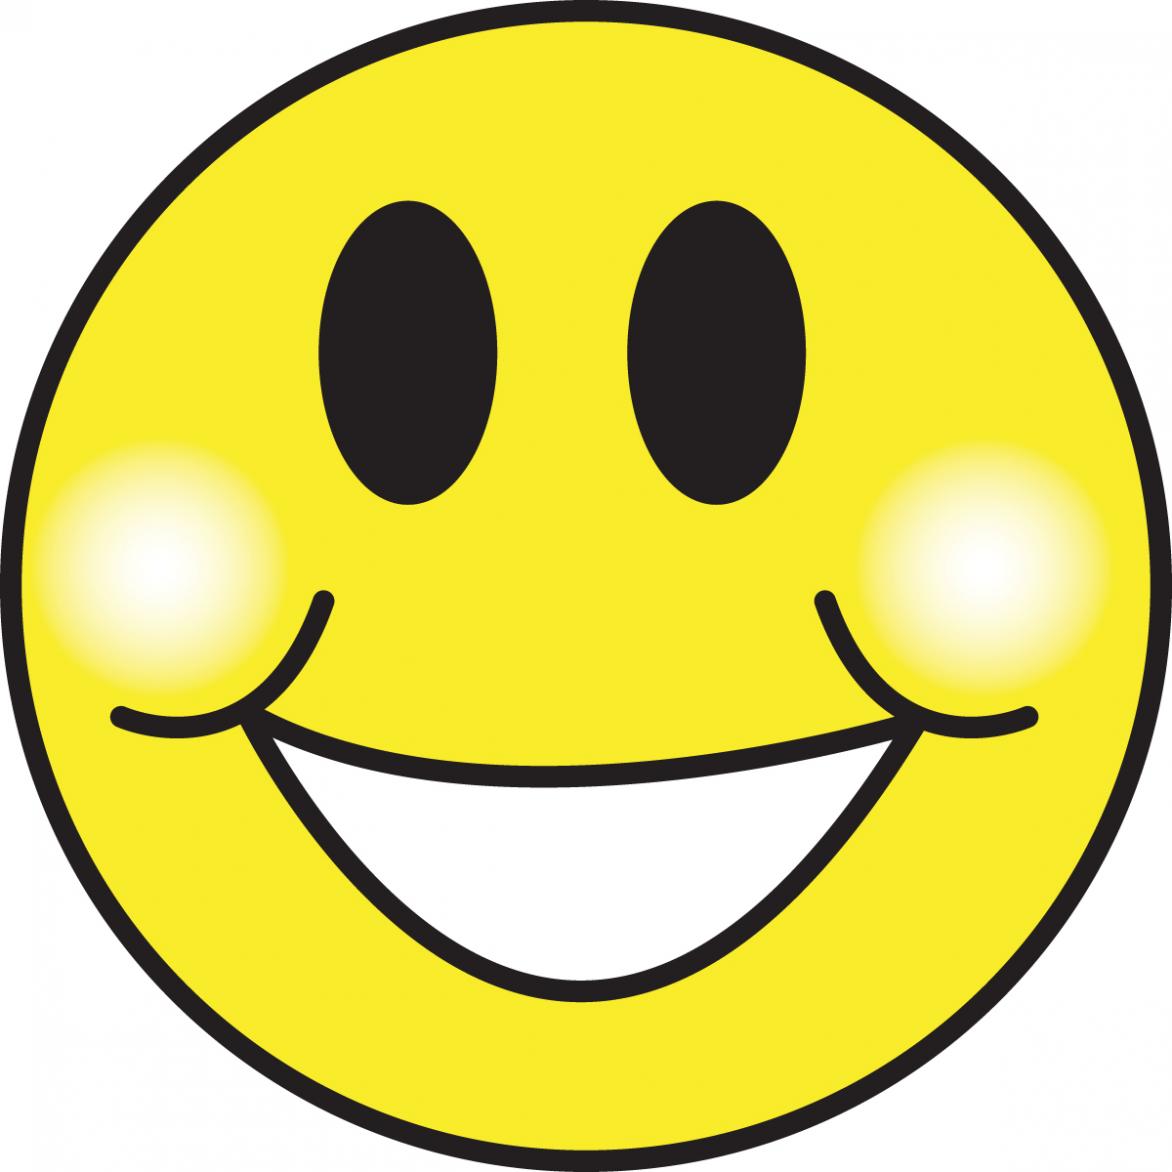 Smiley Face In Cartoon - ClipArt Best